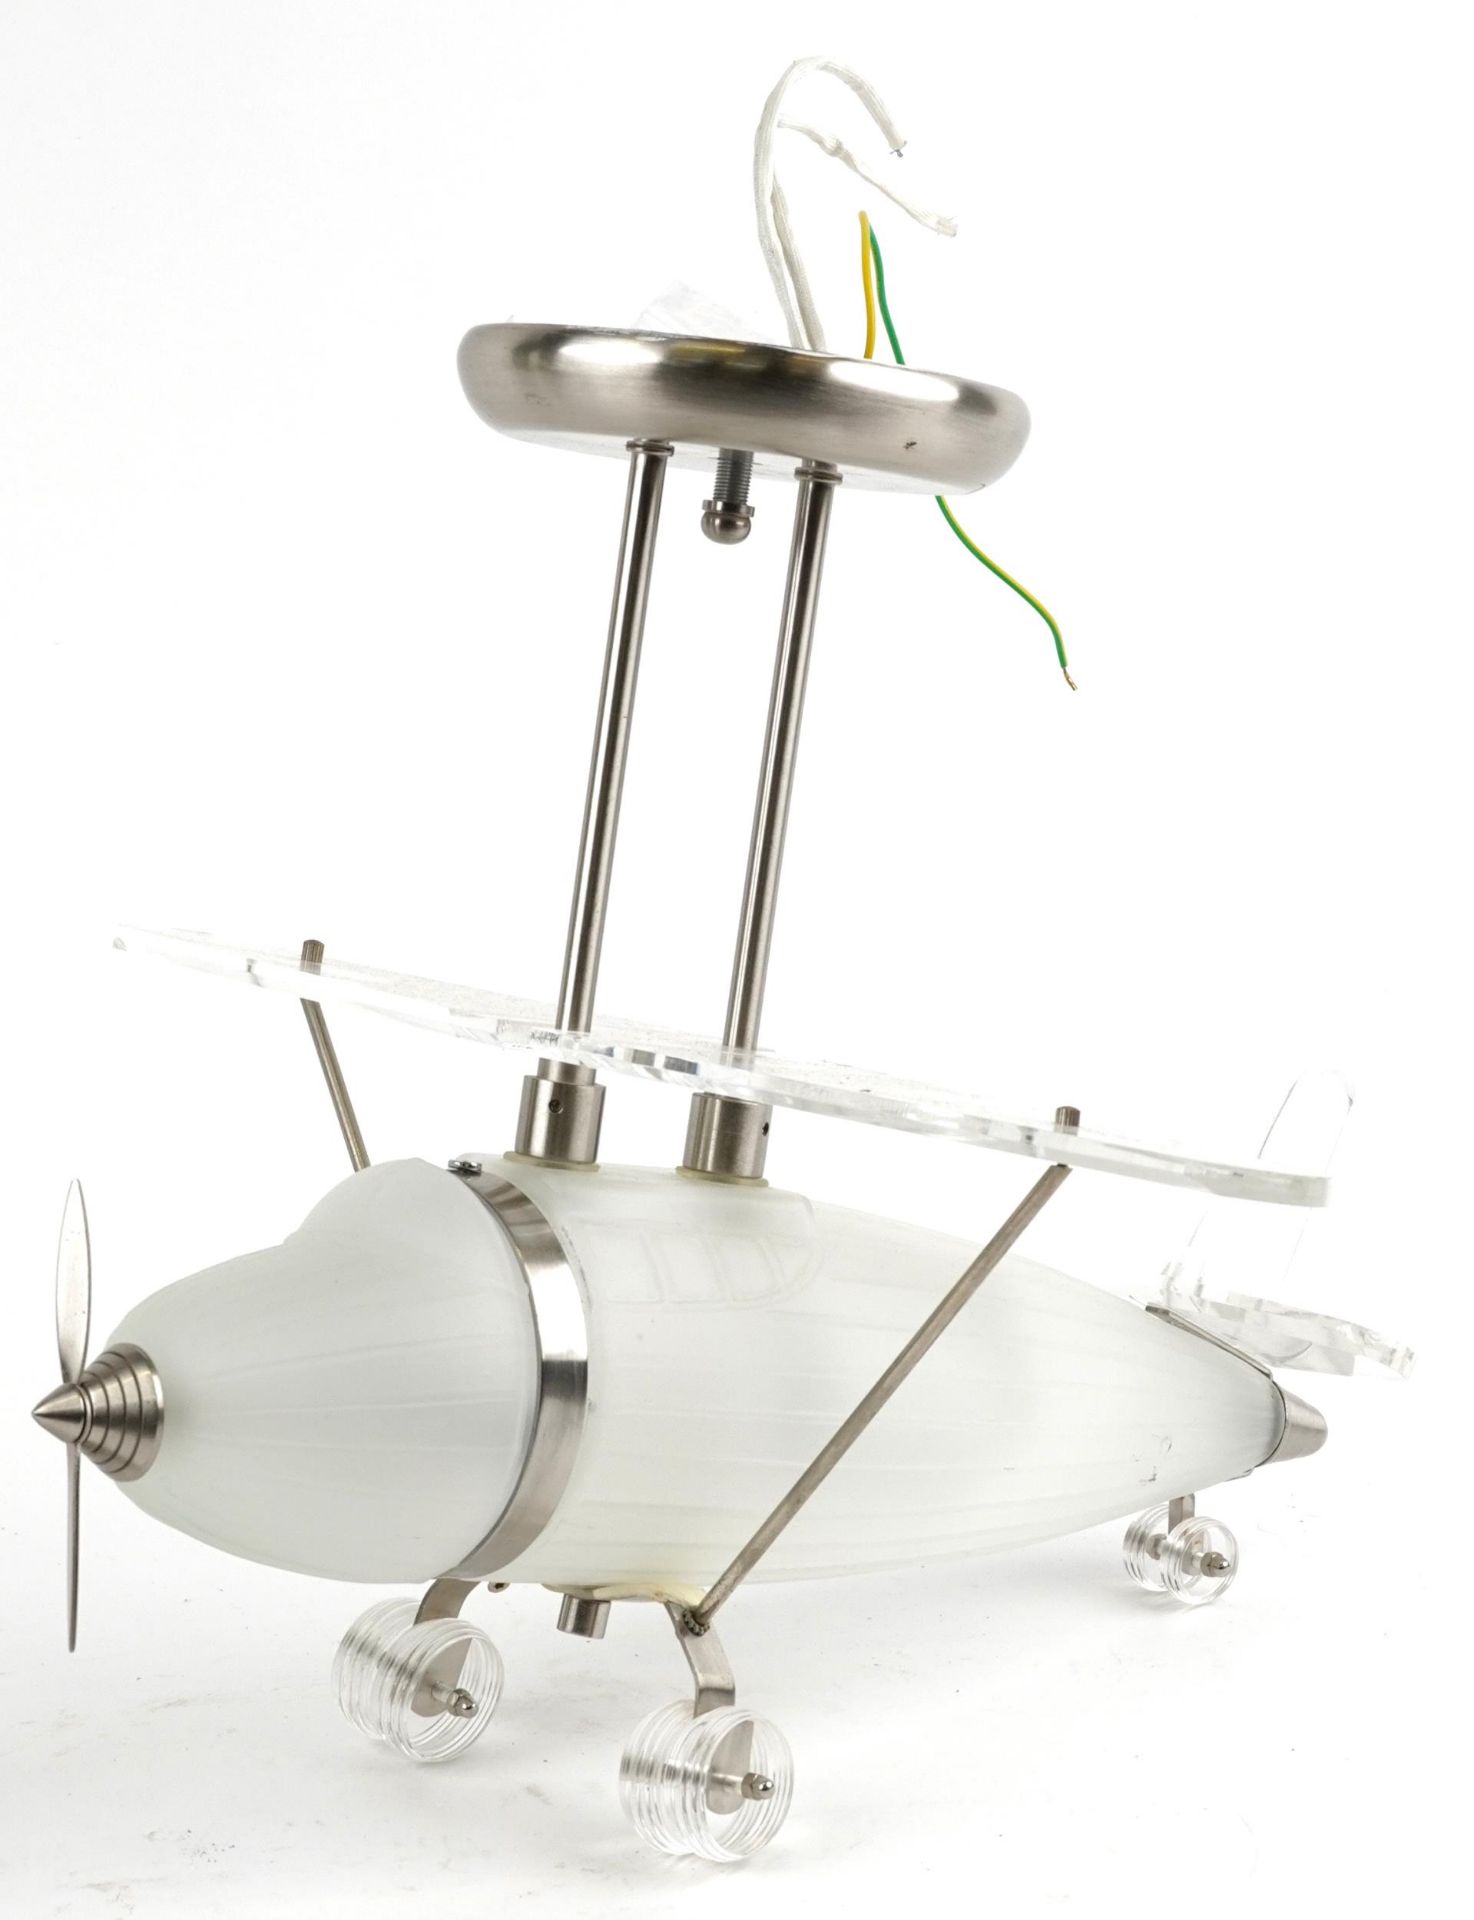 1970s style Perspex and frosted glass light fitting with chromed mounts in the form of an aeroplane,